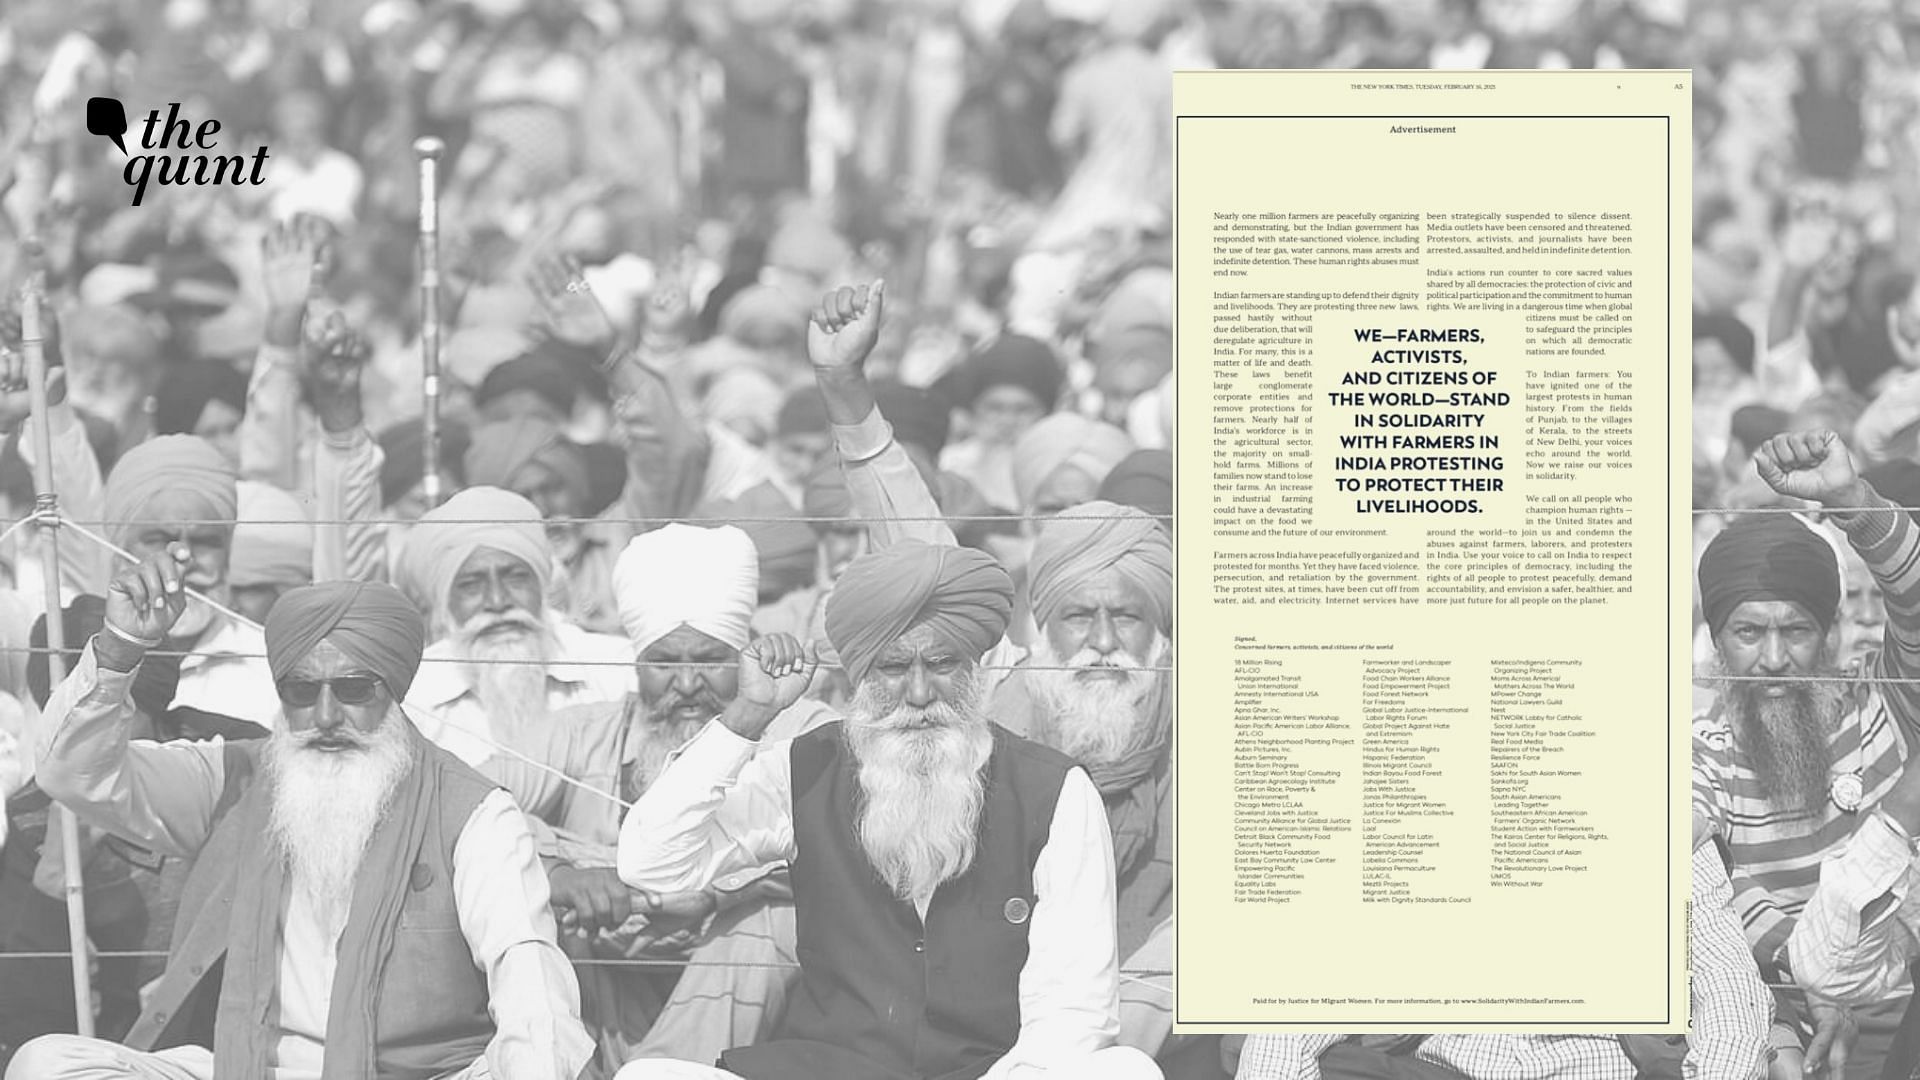 The New York Times (NYT) on Tuesday, 16 February, published a full-page advertisement by over 70 human rights organisations supporting the ongoing farmers’ protests in India.